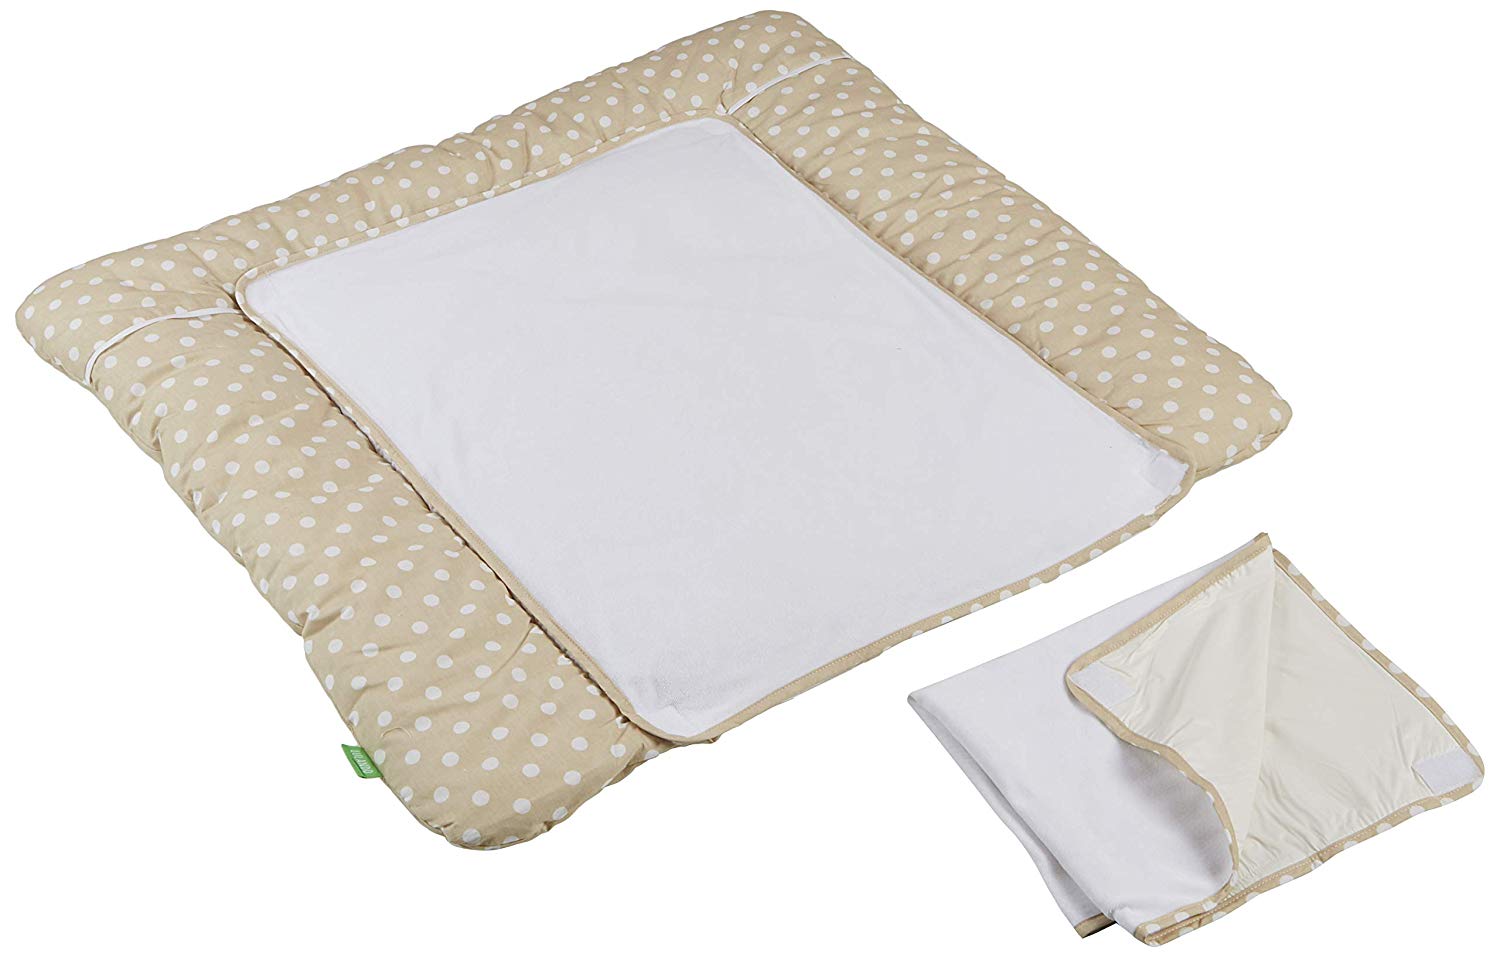 Lulando Changing Mat with 2 Removable Waterproof Covers - Outer Material 100% Cotton - Suitable for the IKEA Malm or Hemnes Units